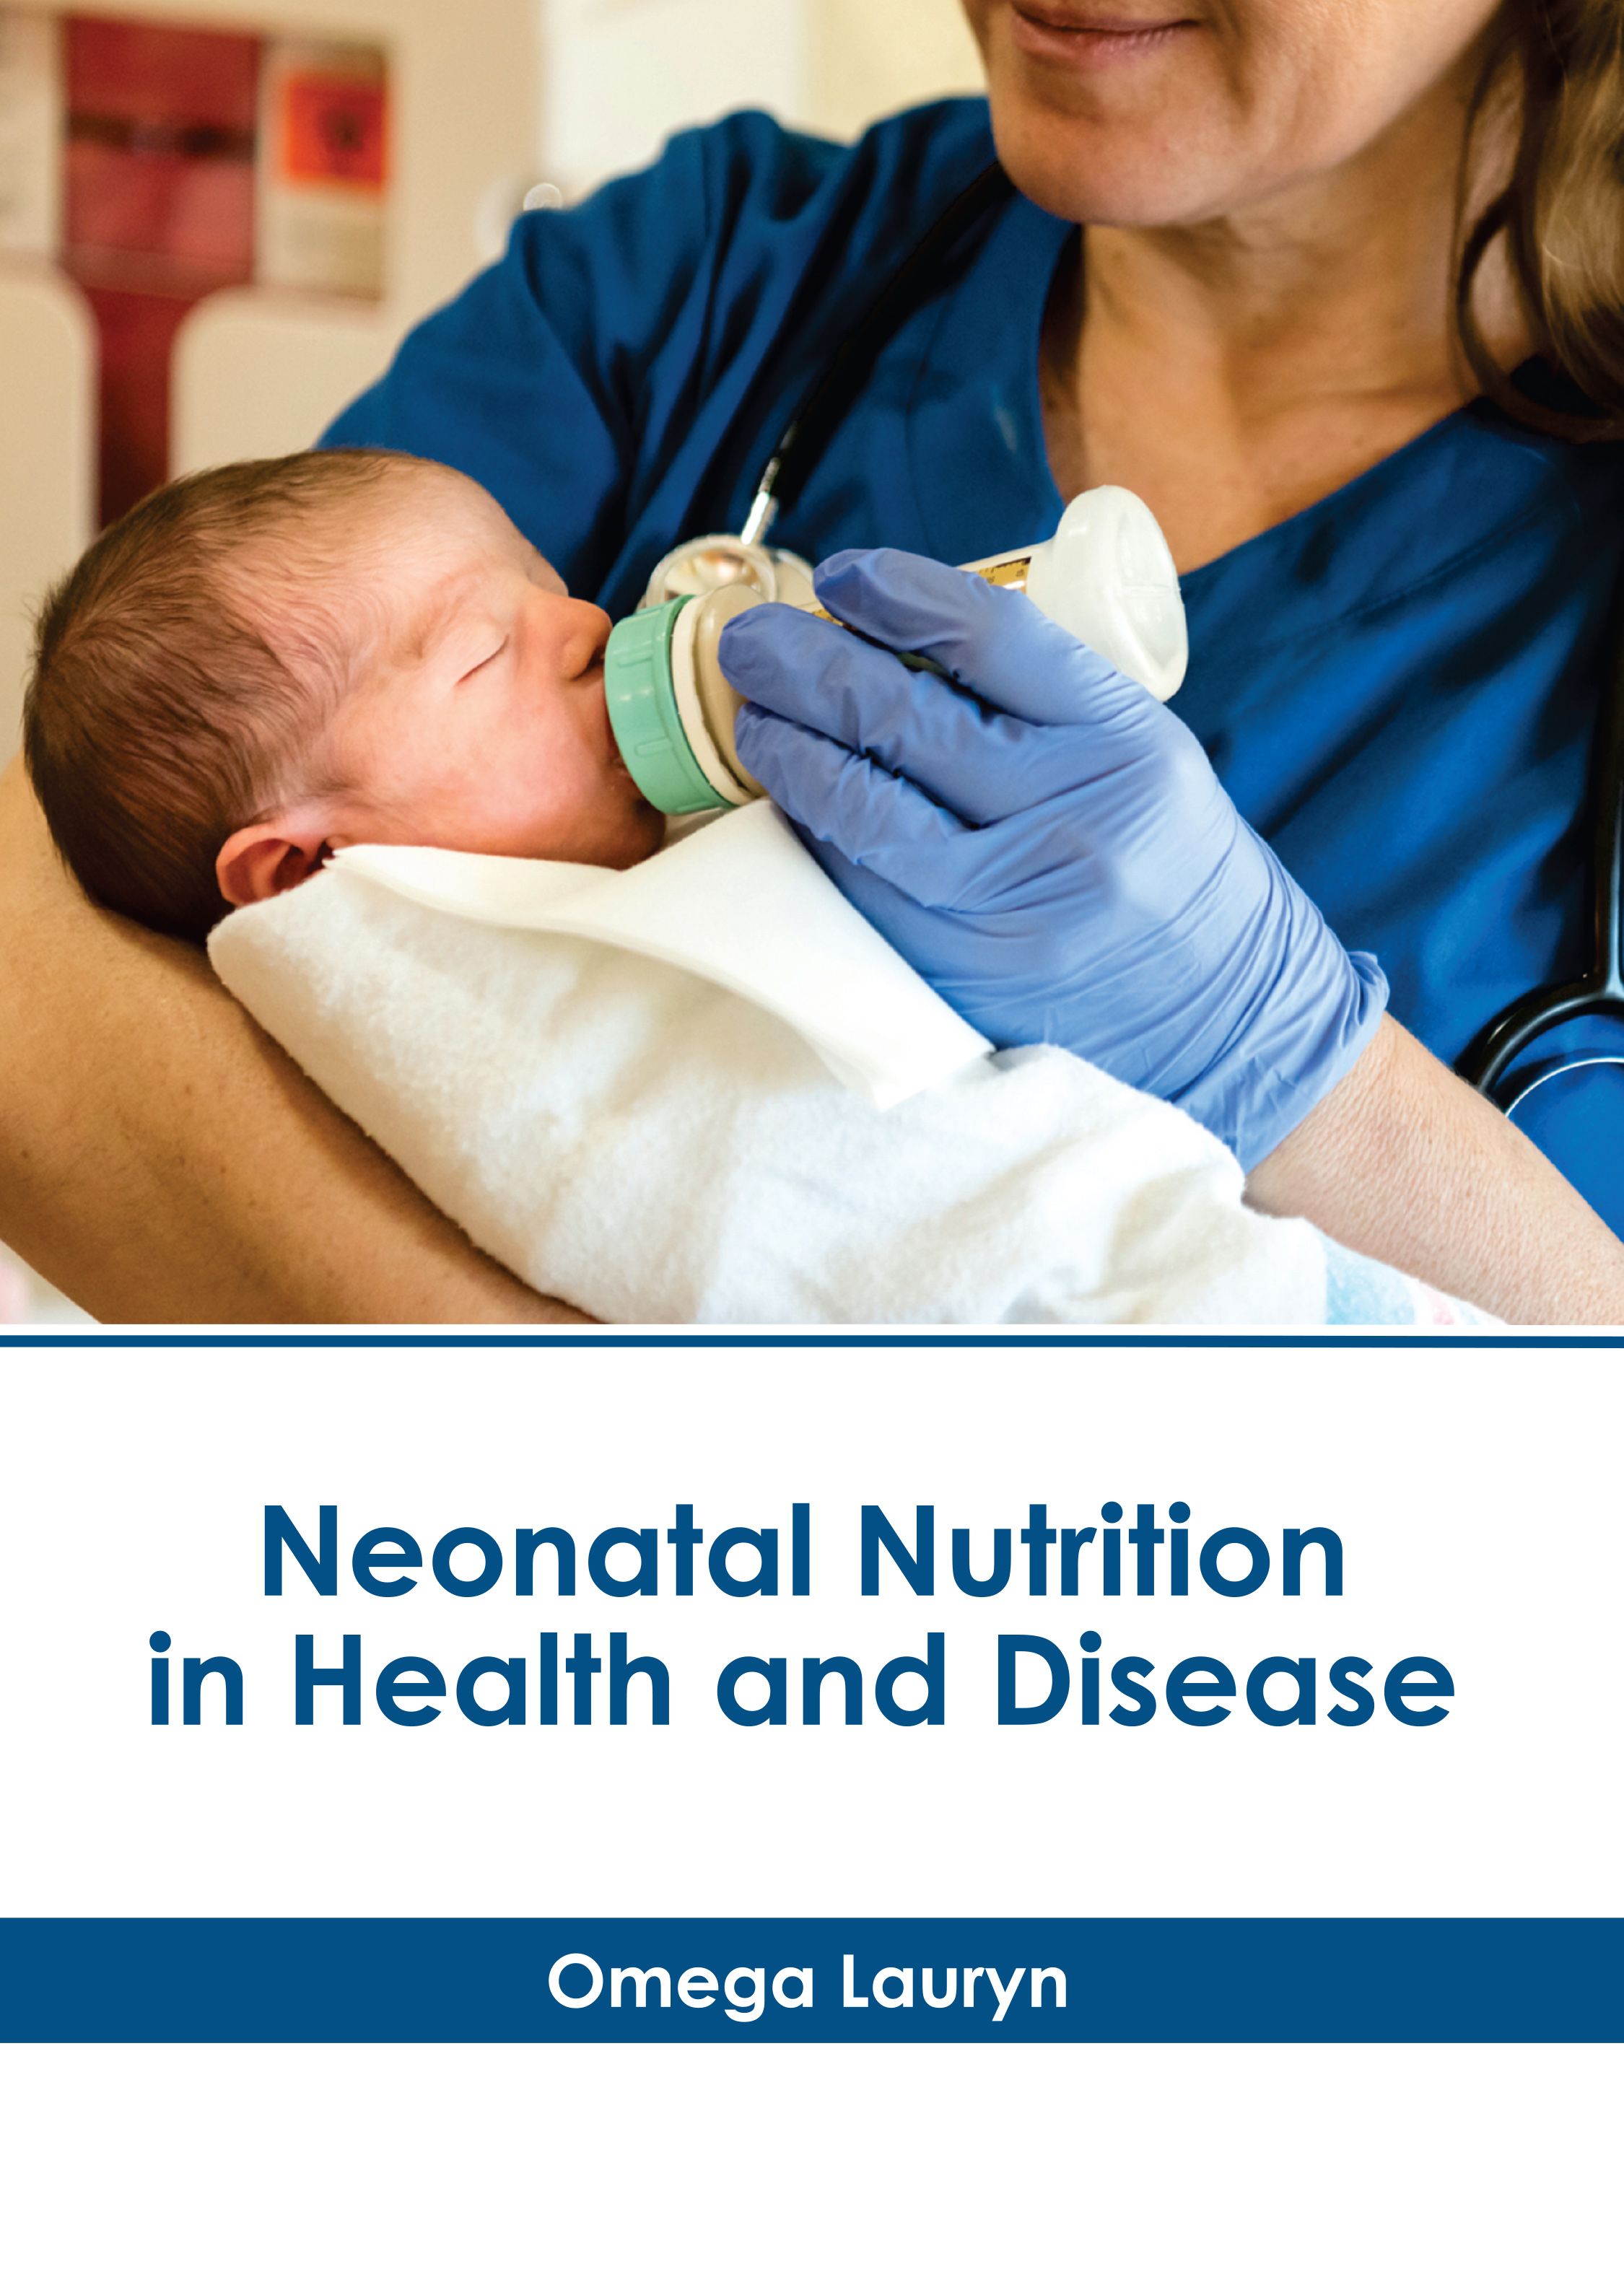 NEONATAL NUTRITION IN HEALTH AND DISEASE